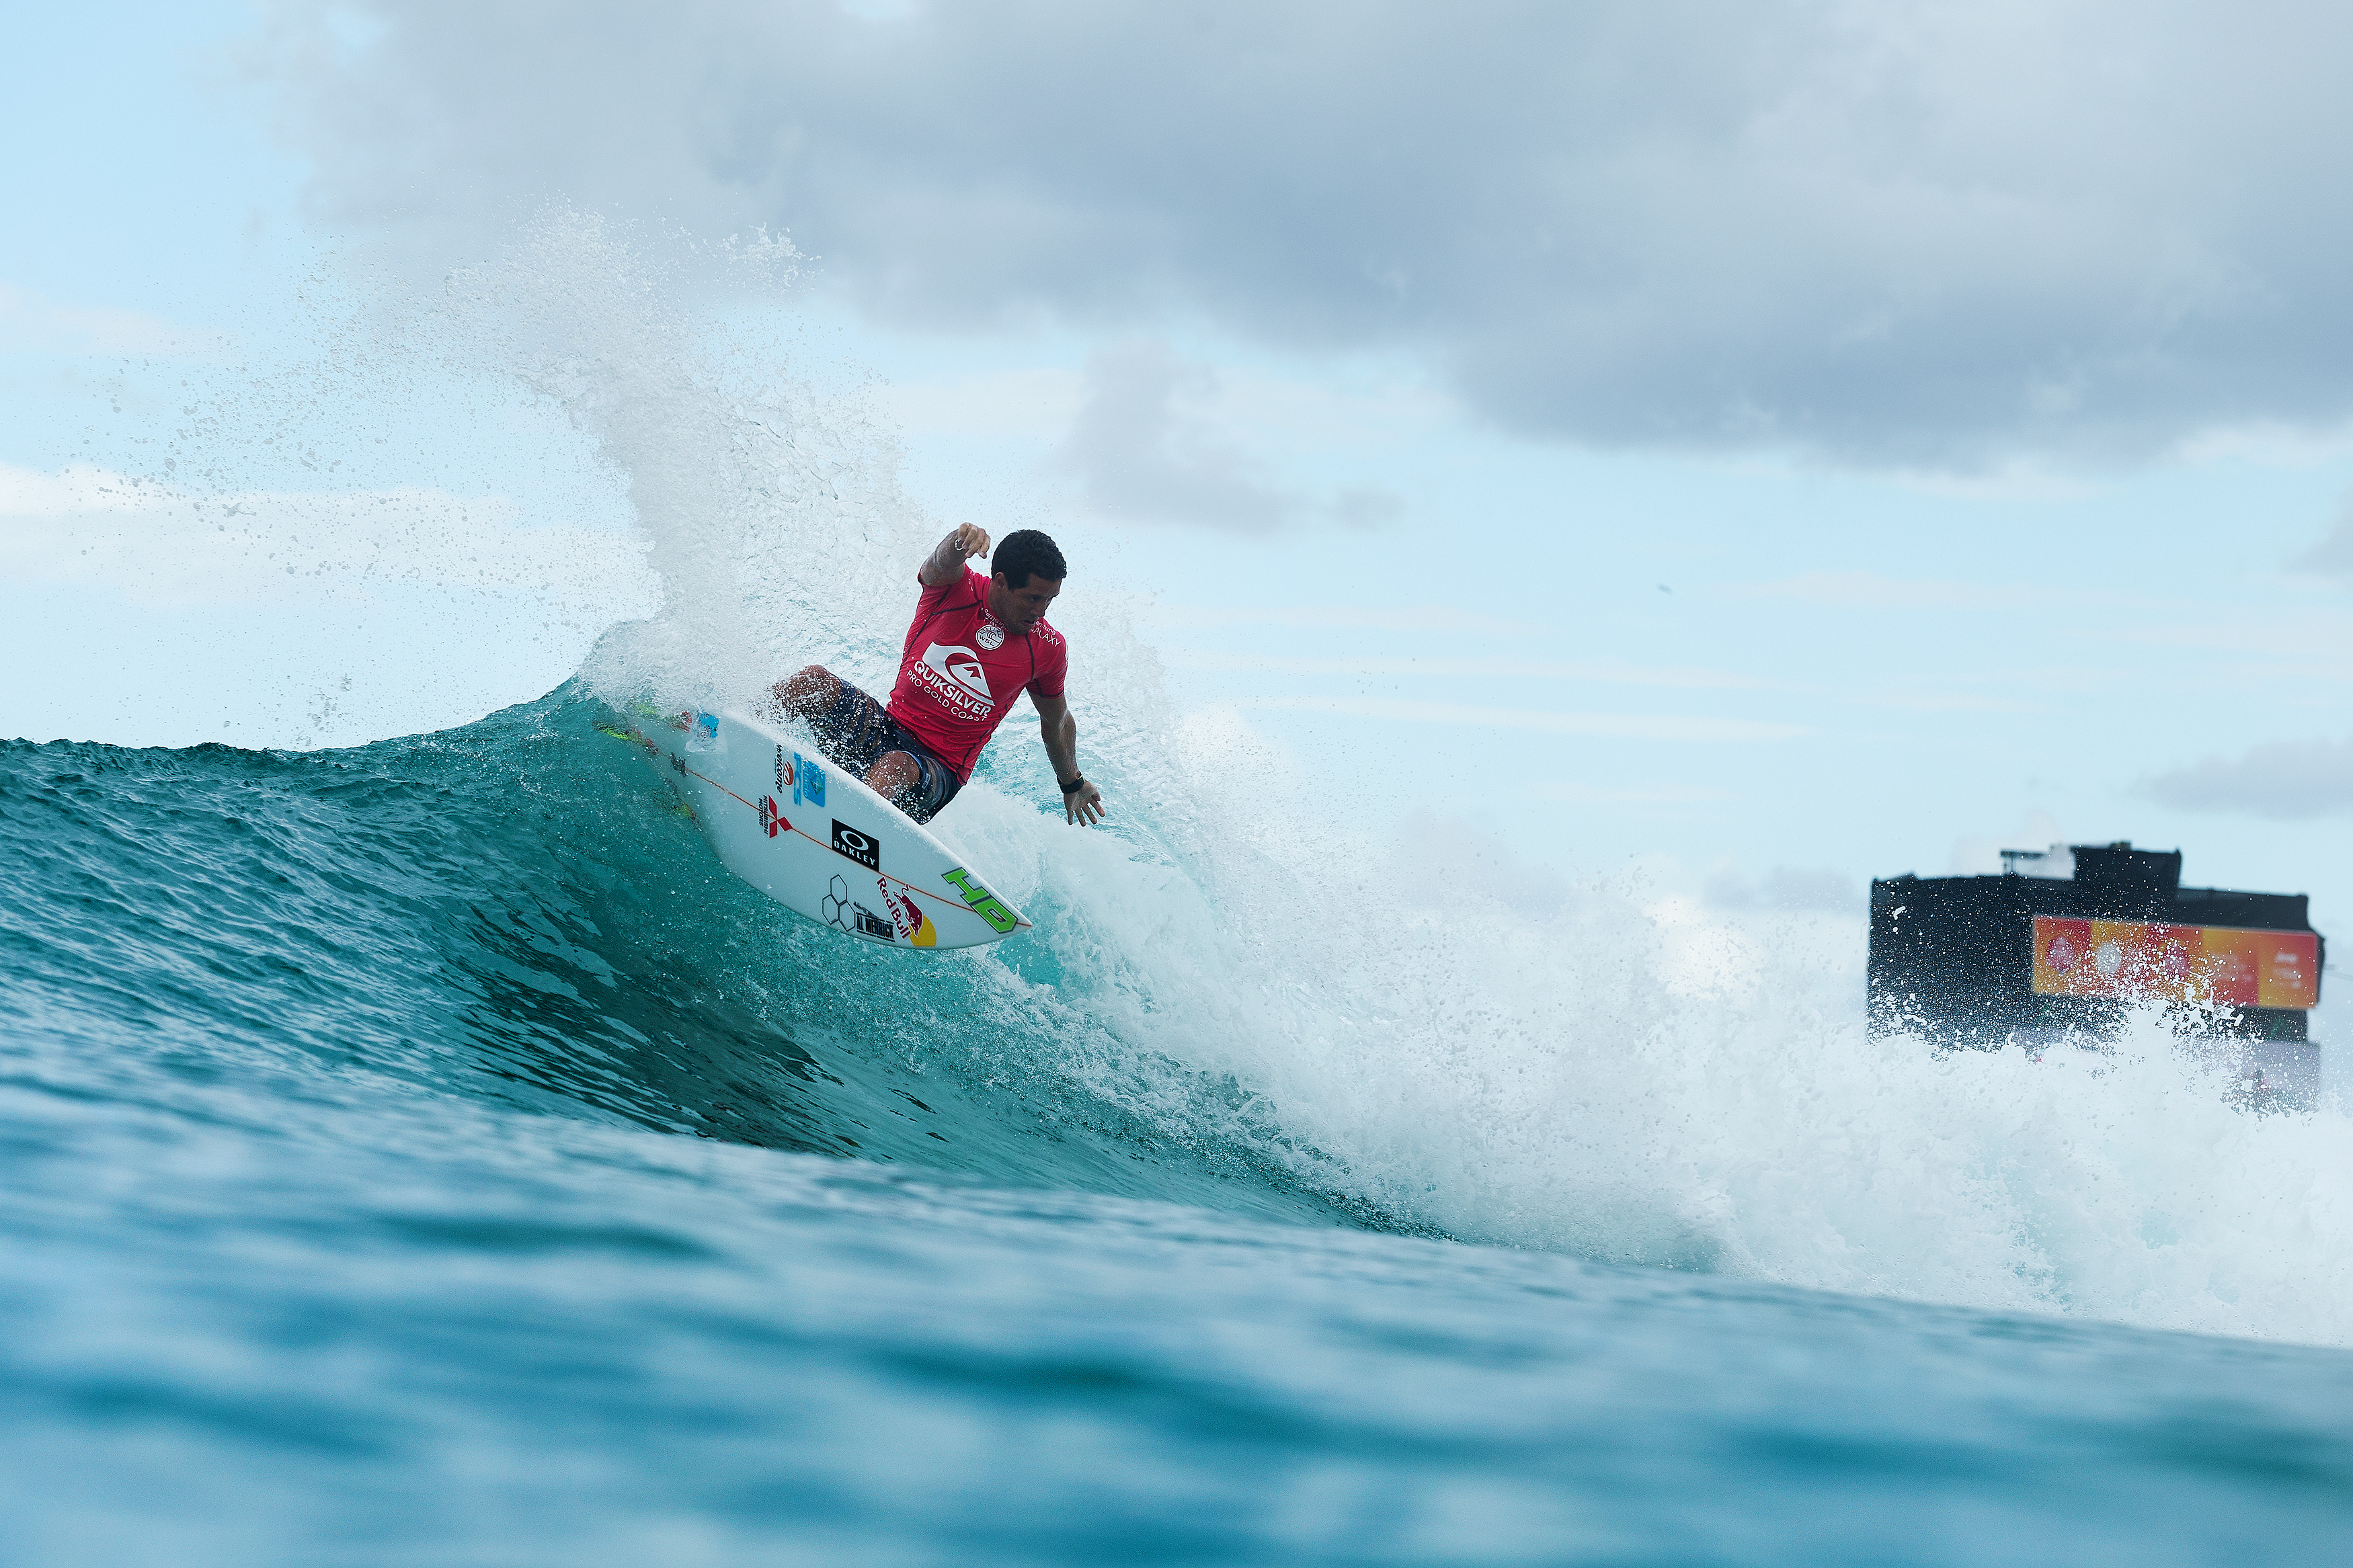 Reining World Champion Adriano De Souza will be looking to get his 2016 competitive season off to a flying start at Snapper Rocks this Thursday when the Quiksilver Pro Gold Coast Kicks off. Image: WSL / Cestrari